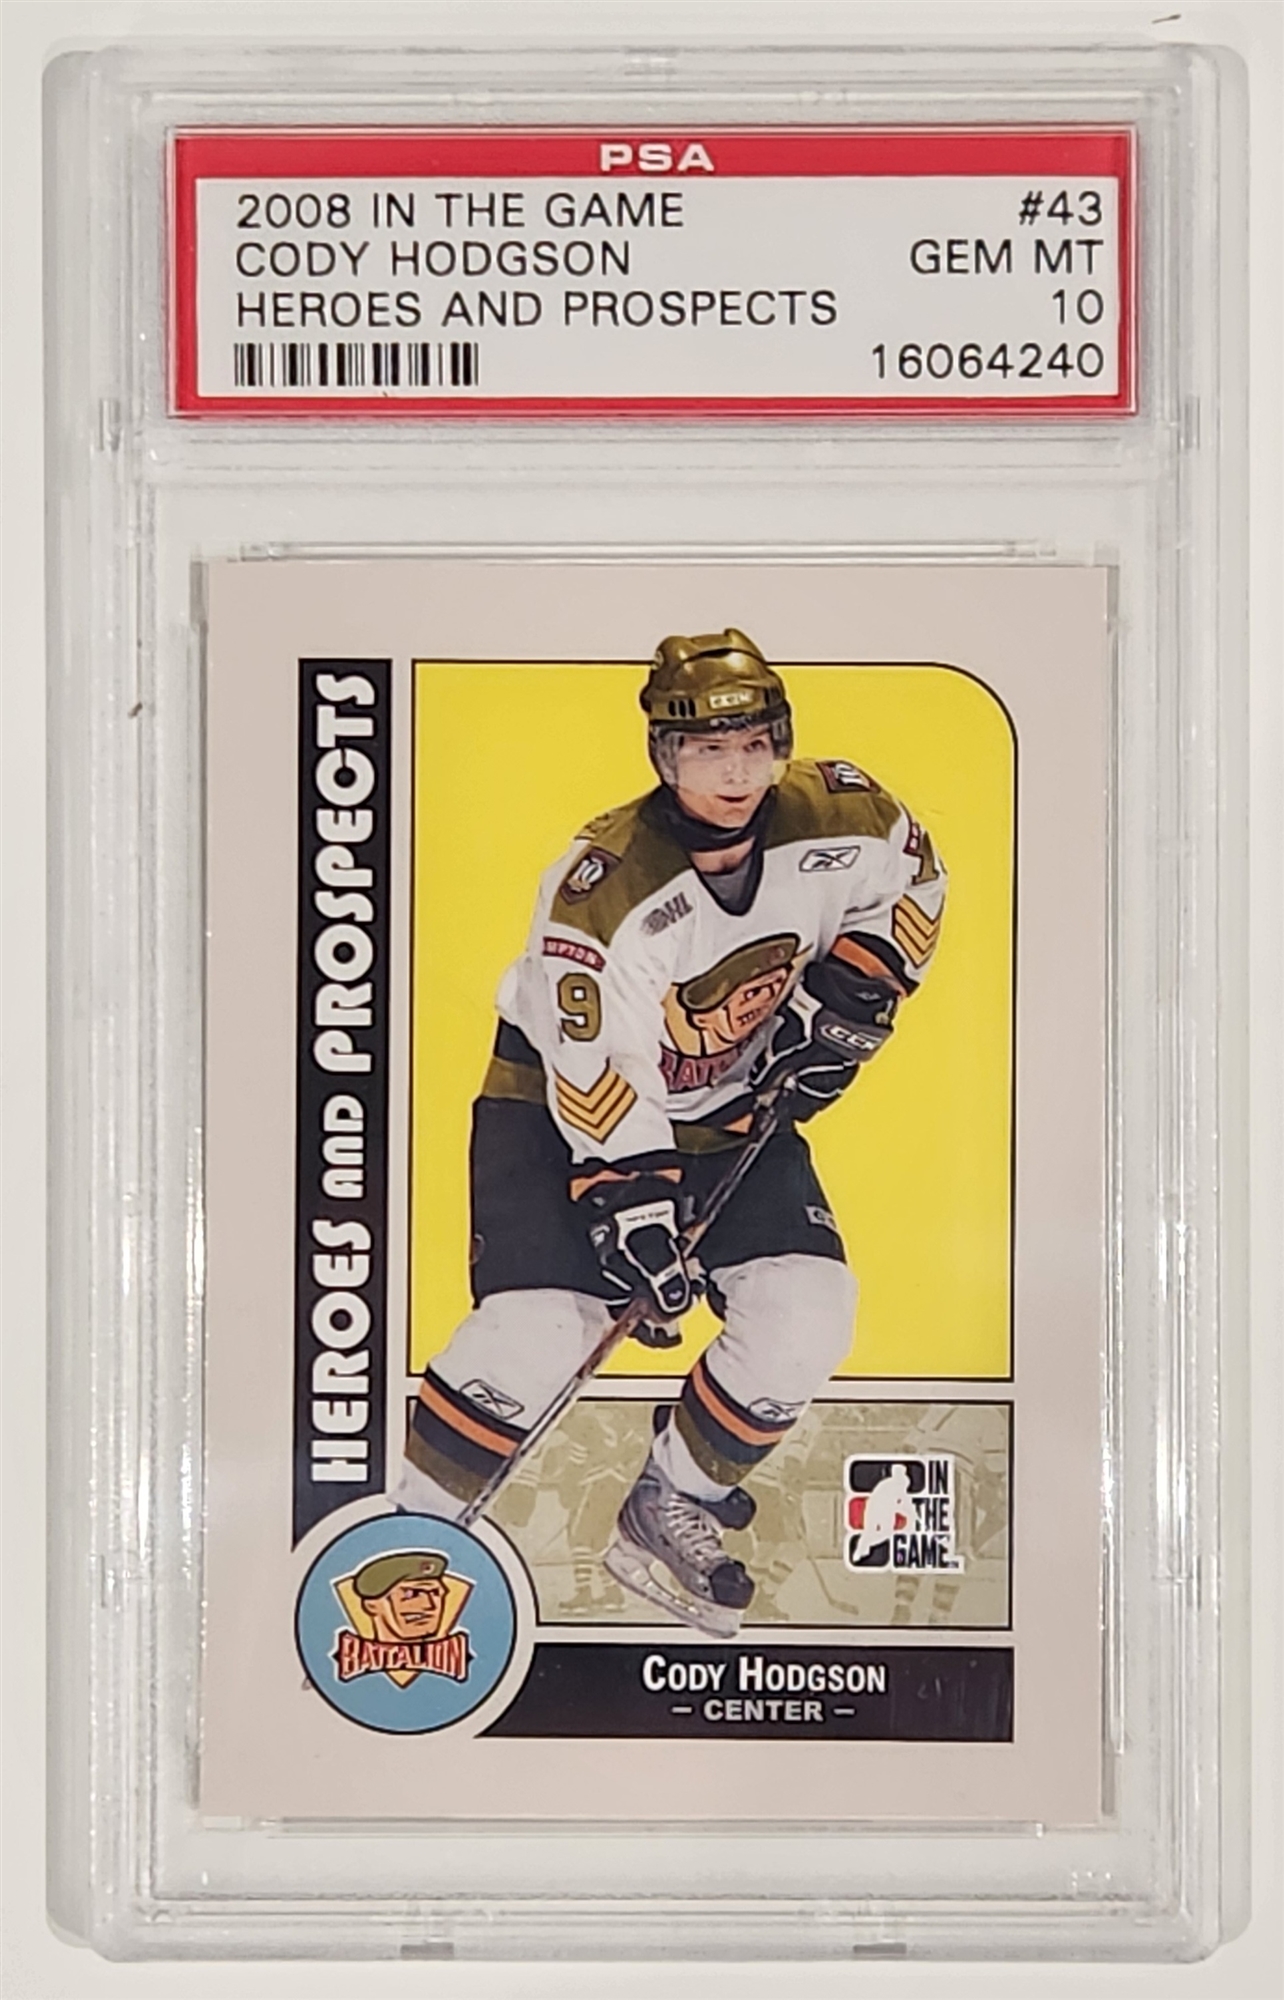 Cody Hodgson 2008 In The Game Heroes And Prospects Pre Rookie Card Graded PSA 10